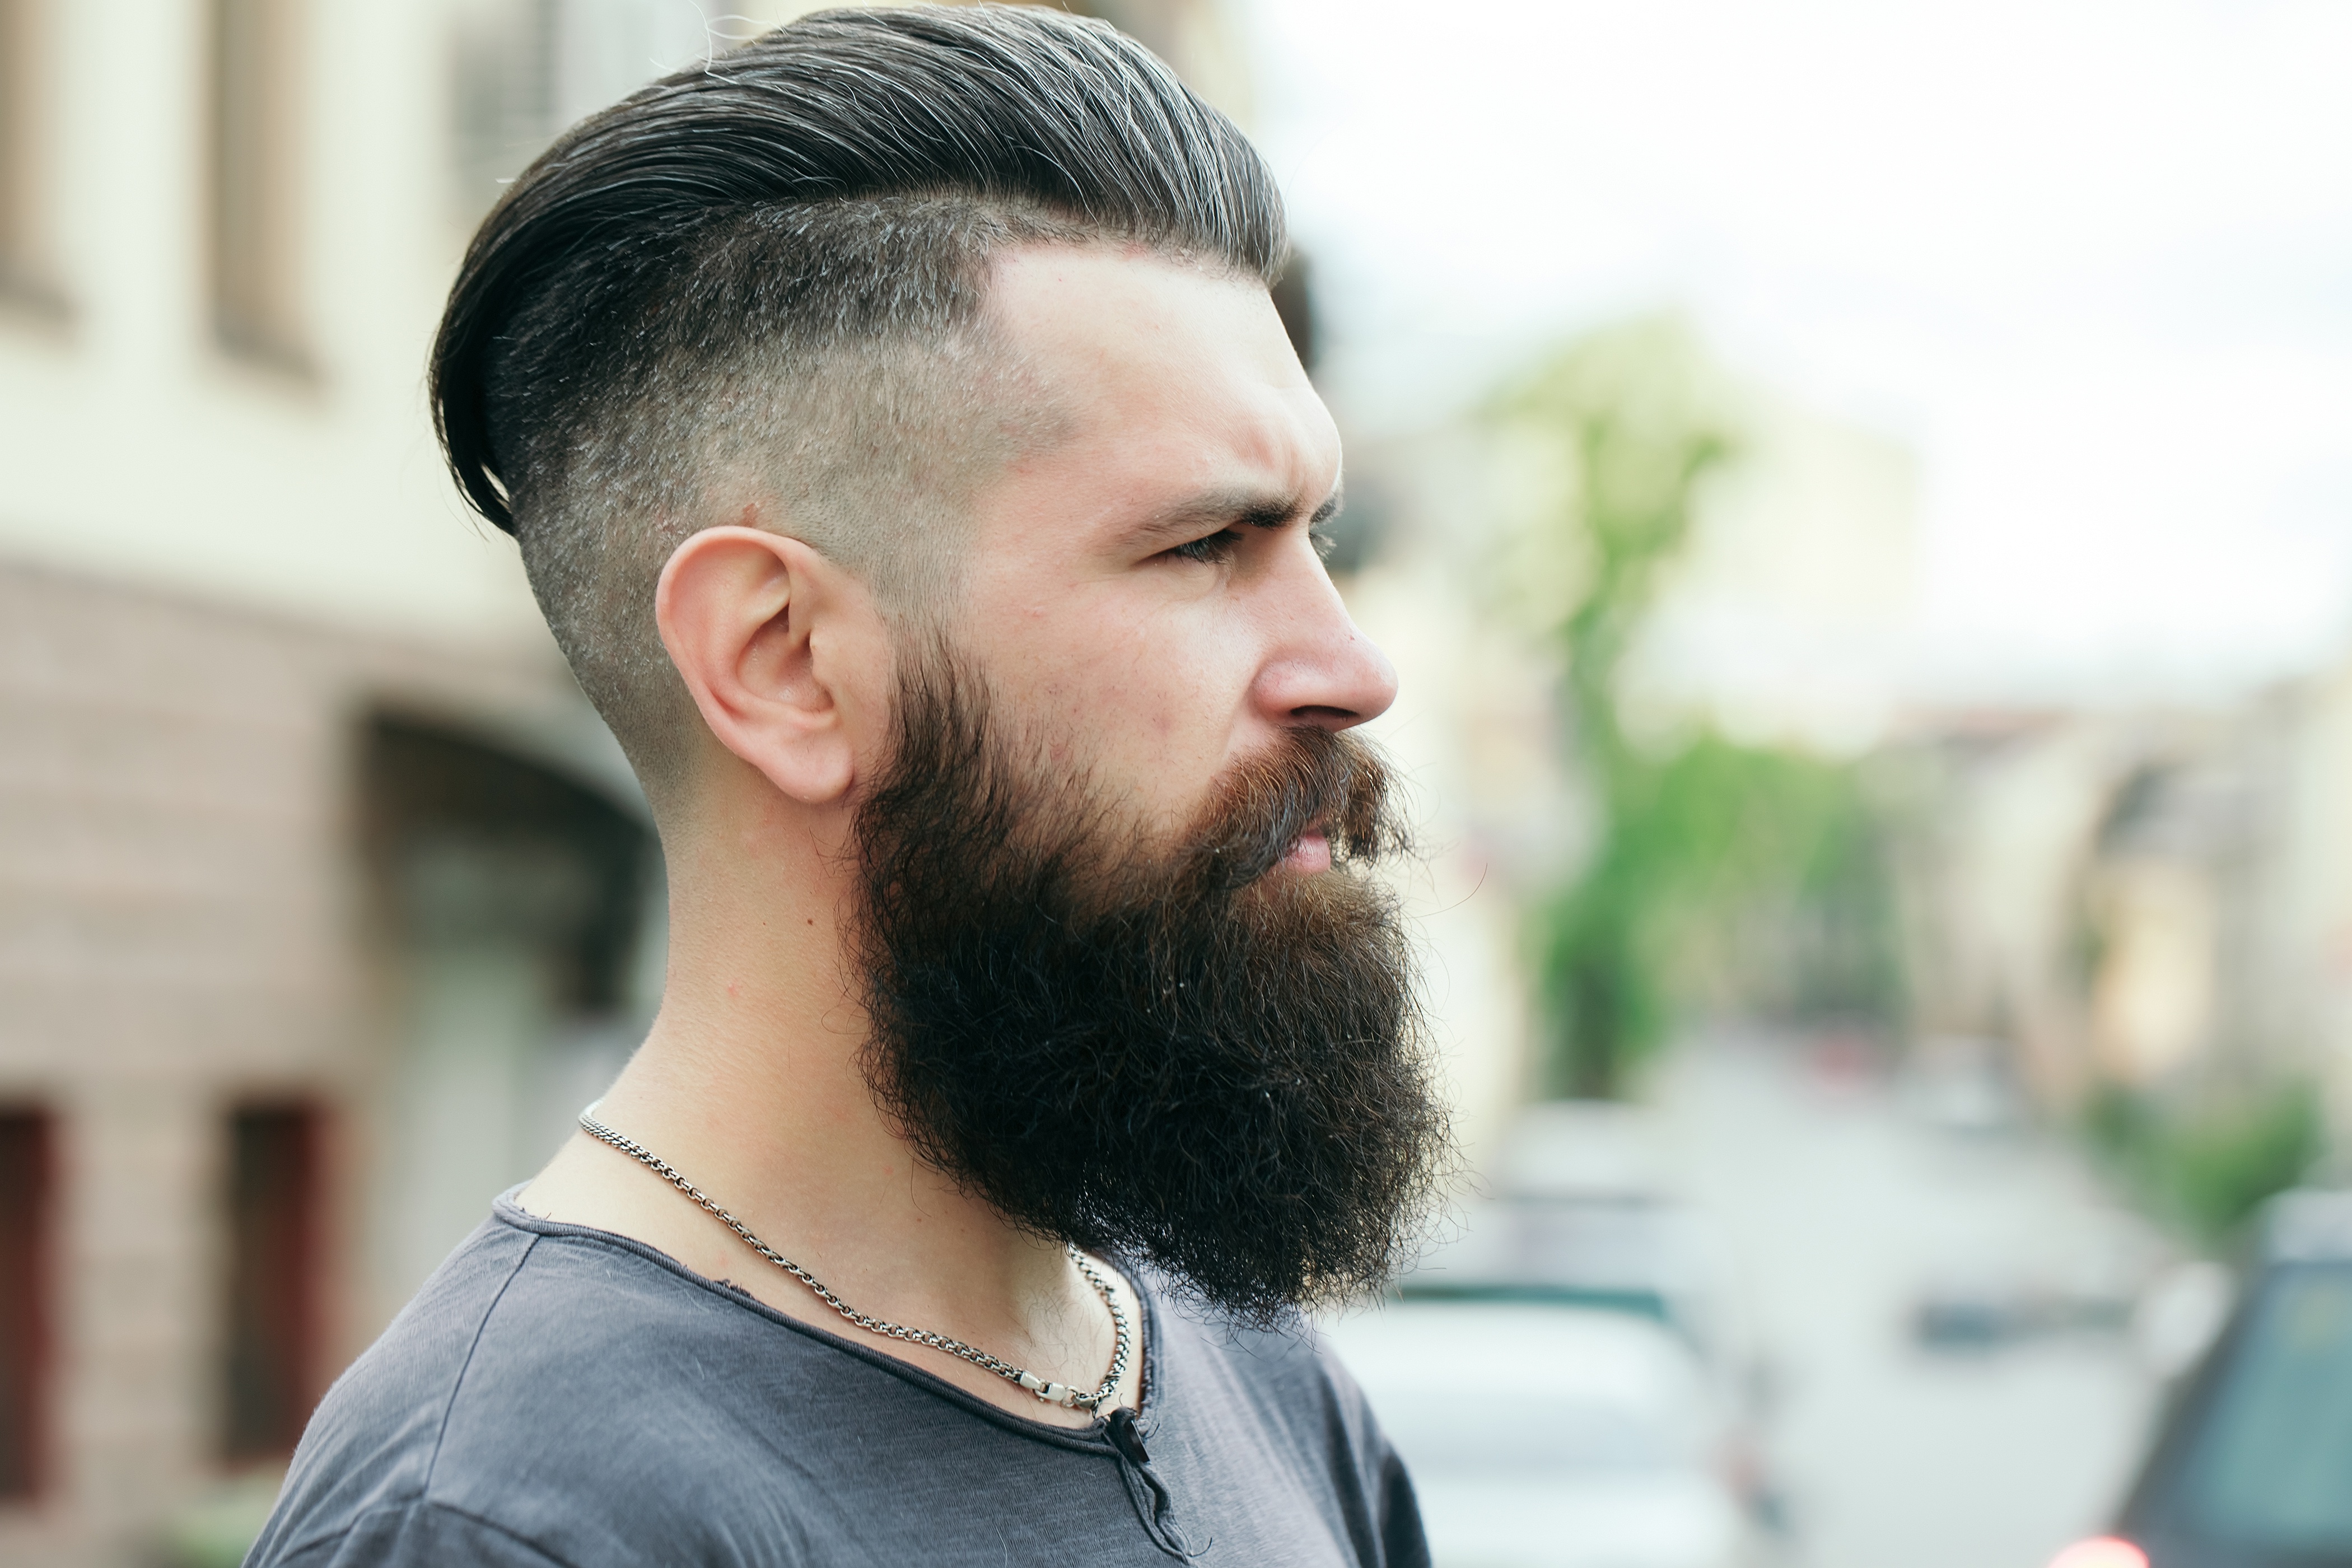 100+ Beard Pictures | Download Free Images on Unsplash